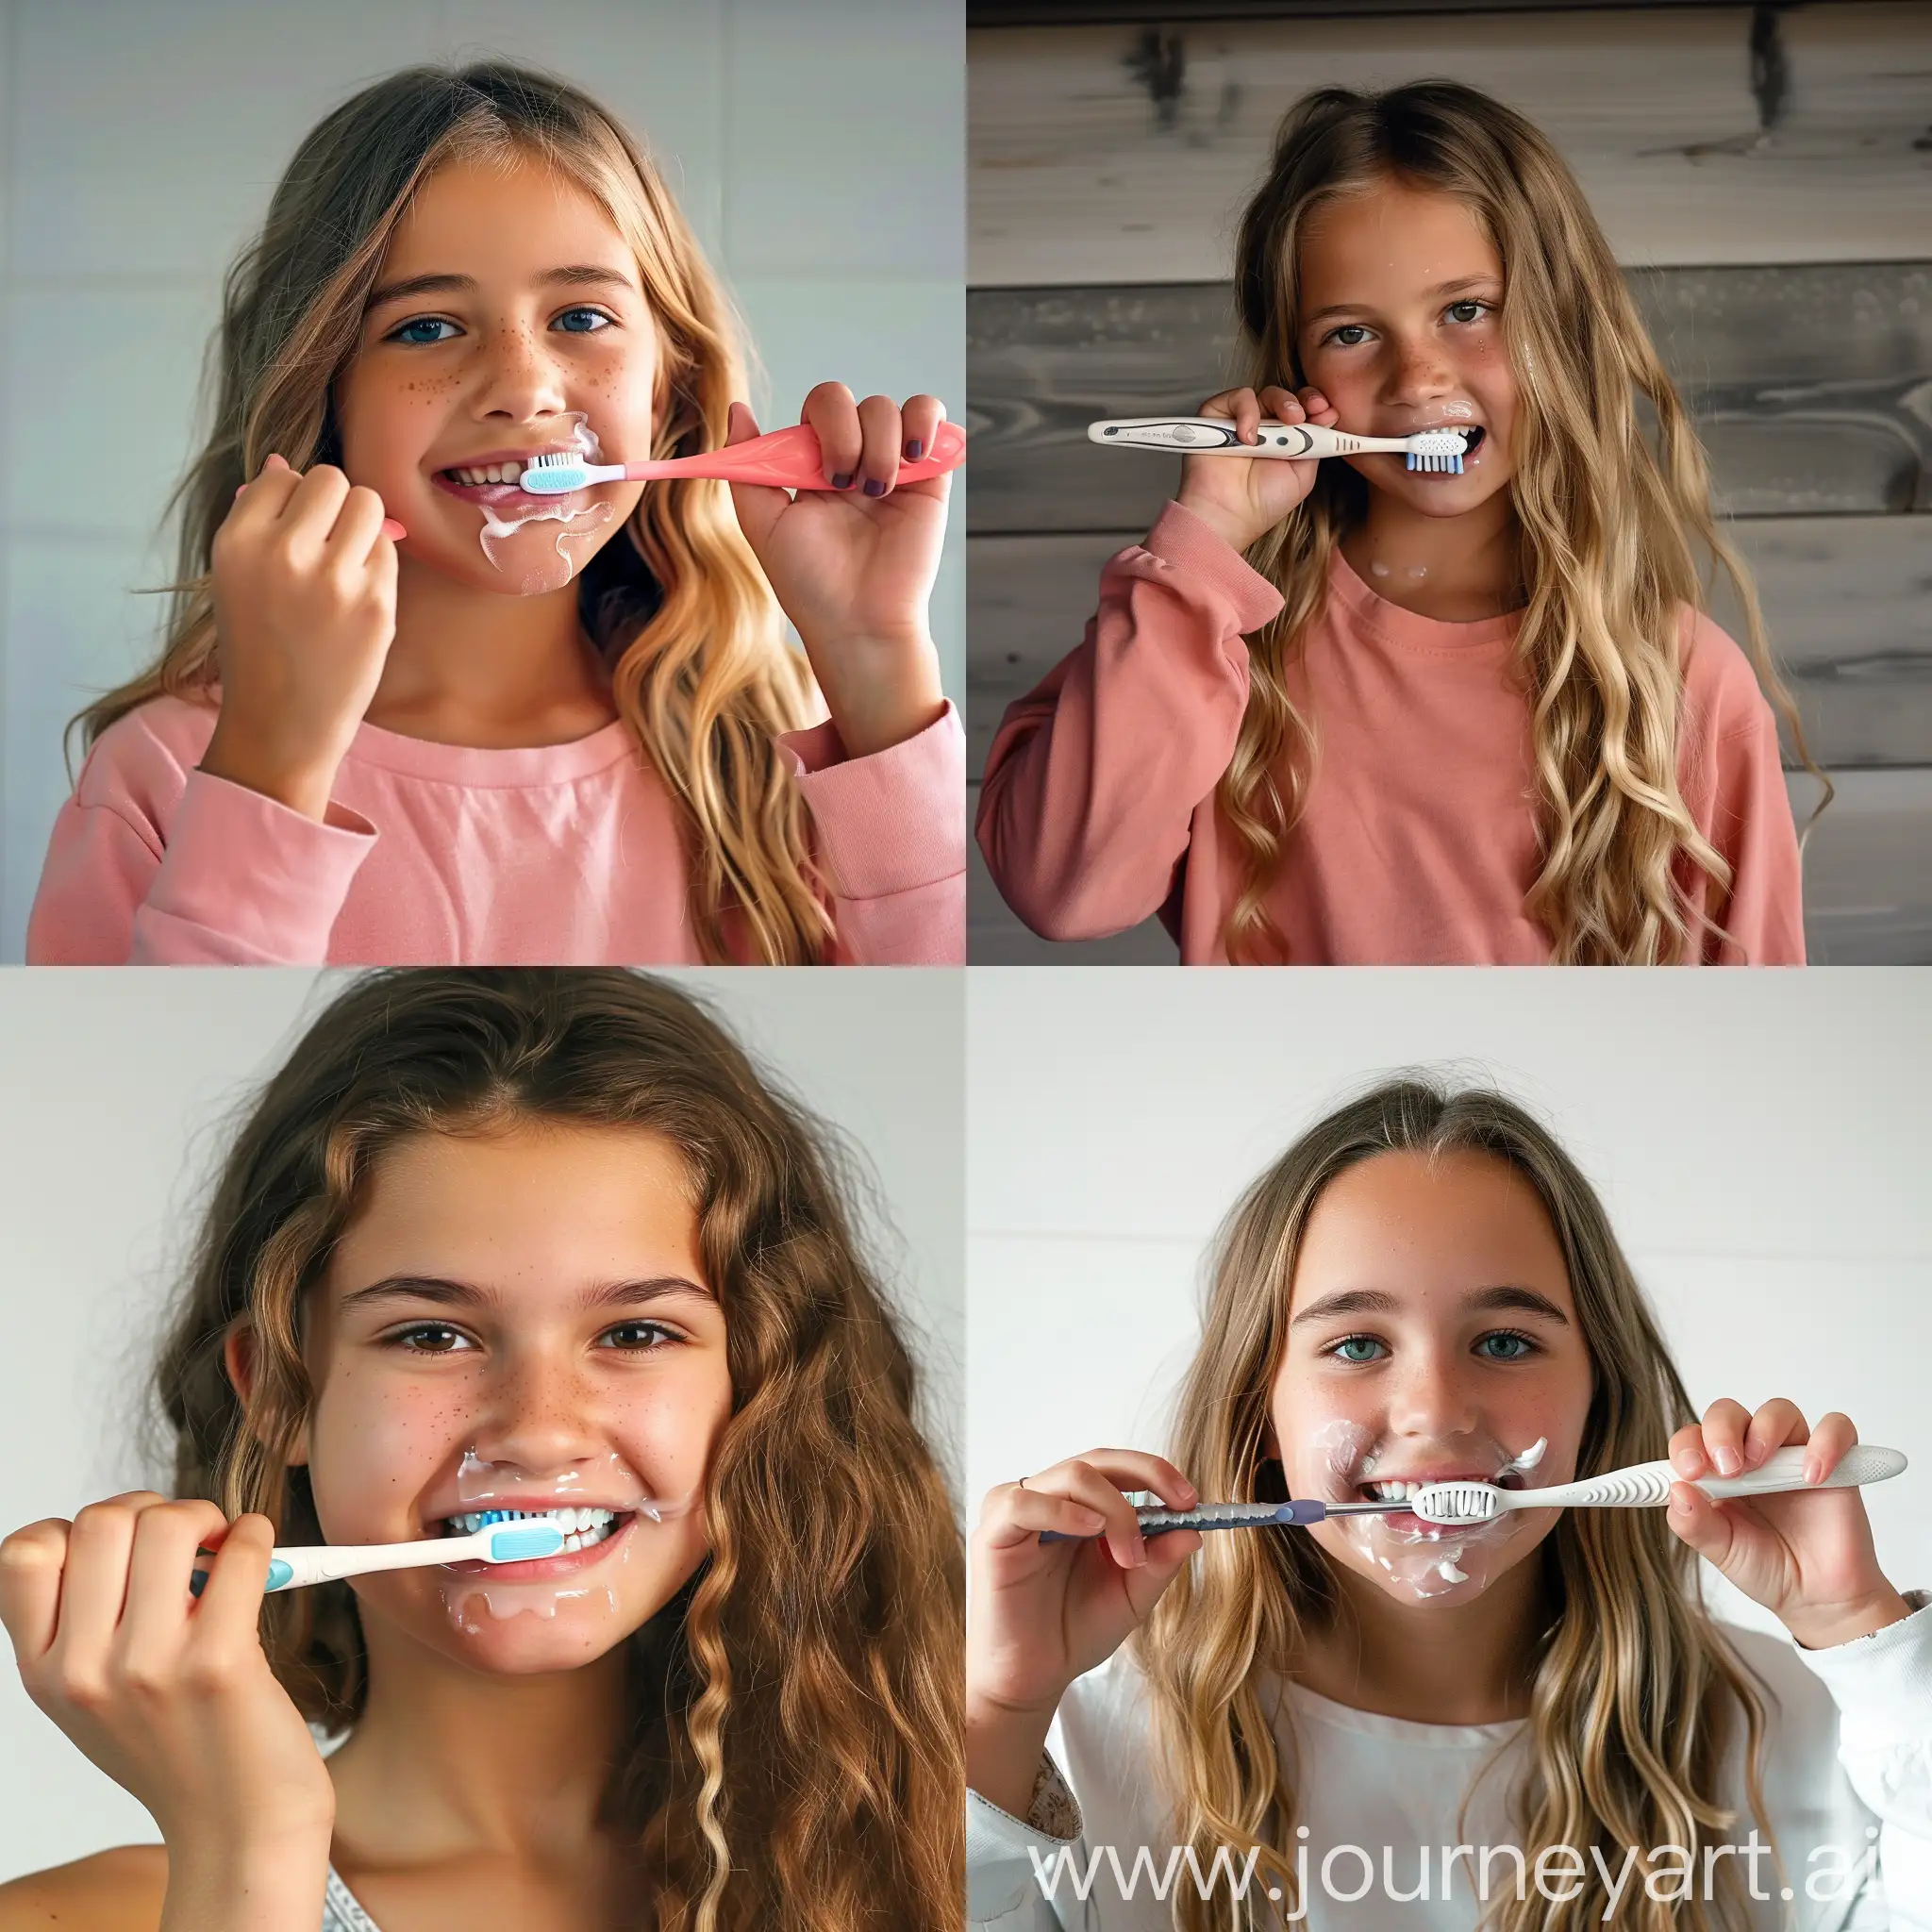 Adolescent-Oral-Care-Teen-Girl-Engaged-in-Toothbrushing-Routine